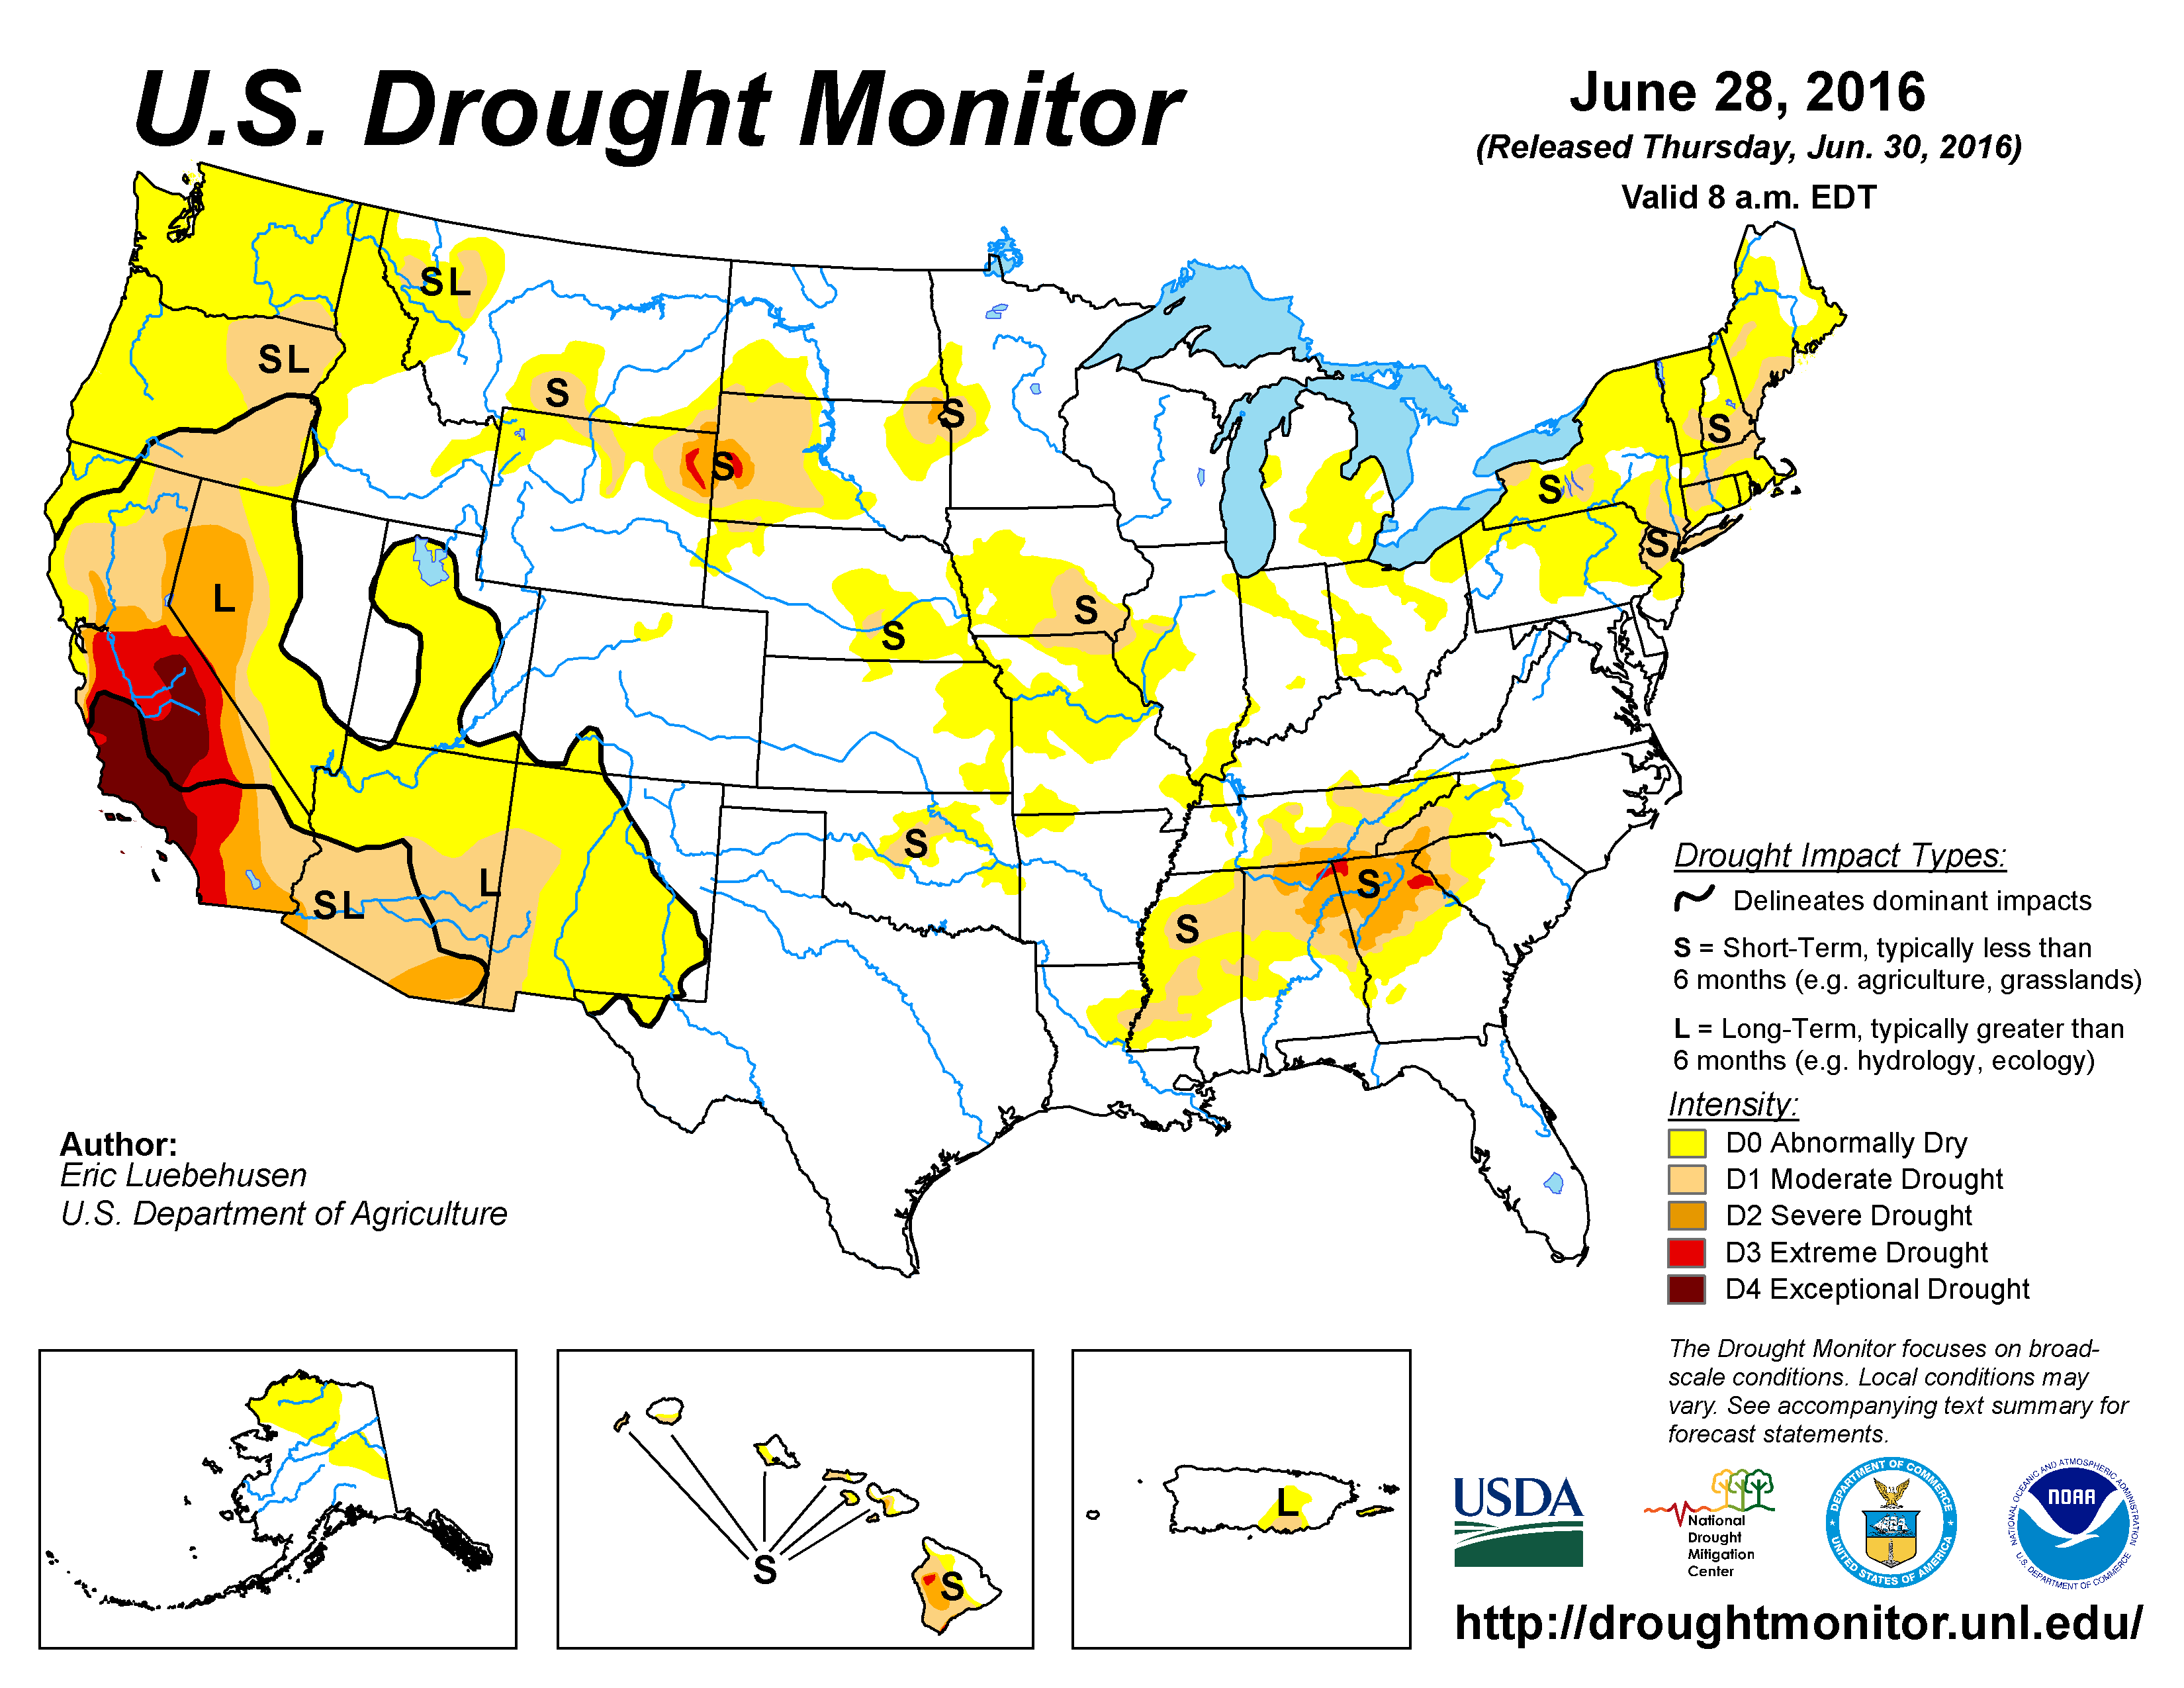 The U.S. Drought Monitor drought map valid June 28, 2016